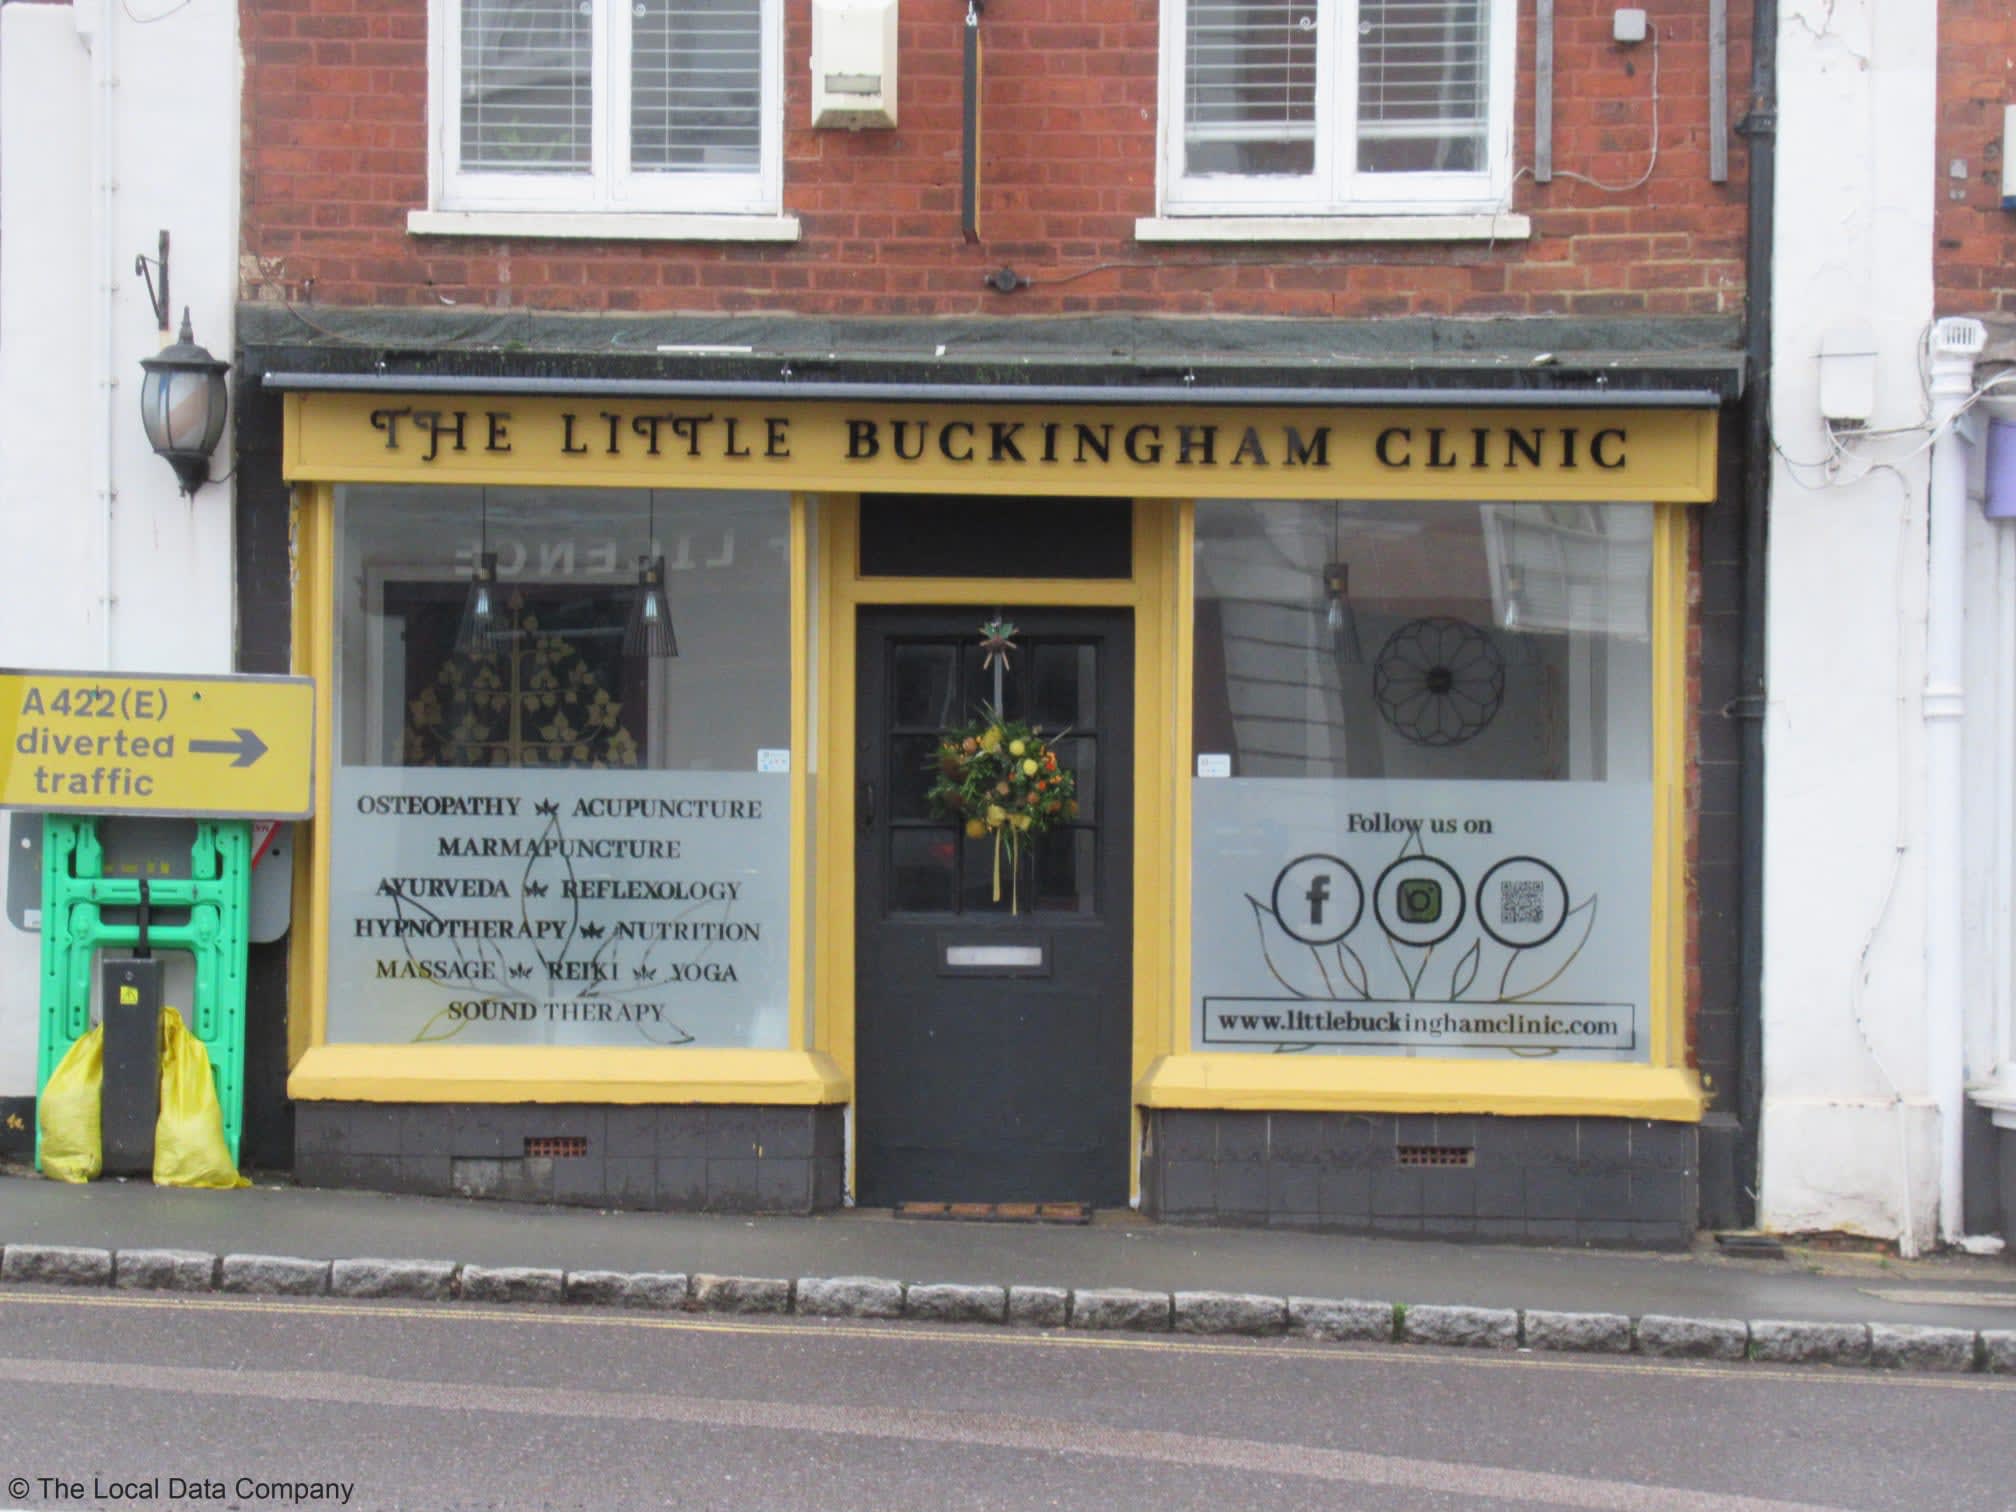 Images The Little Buckingham Clinic